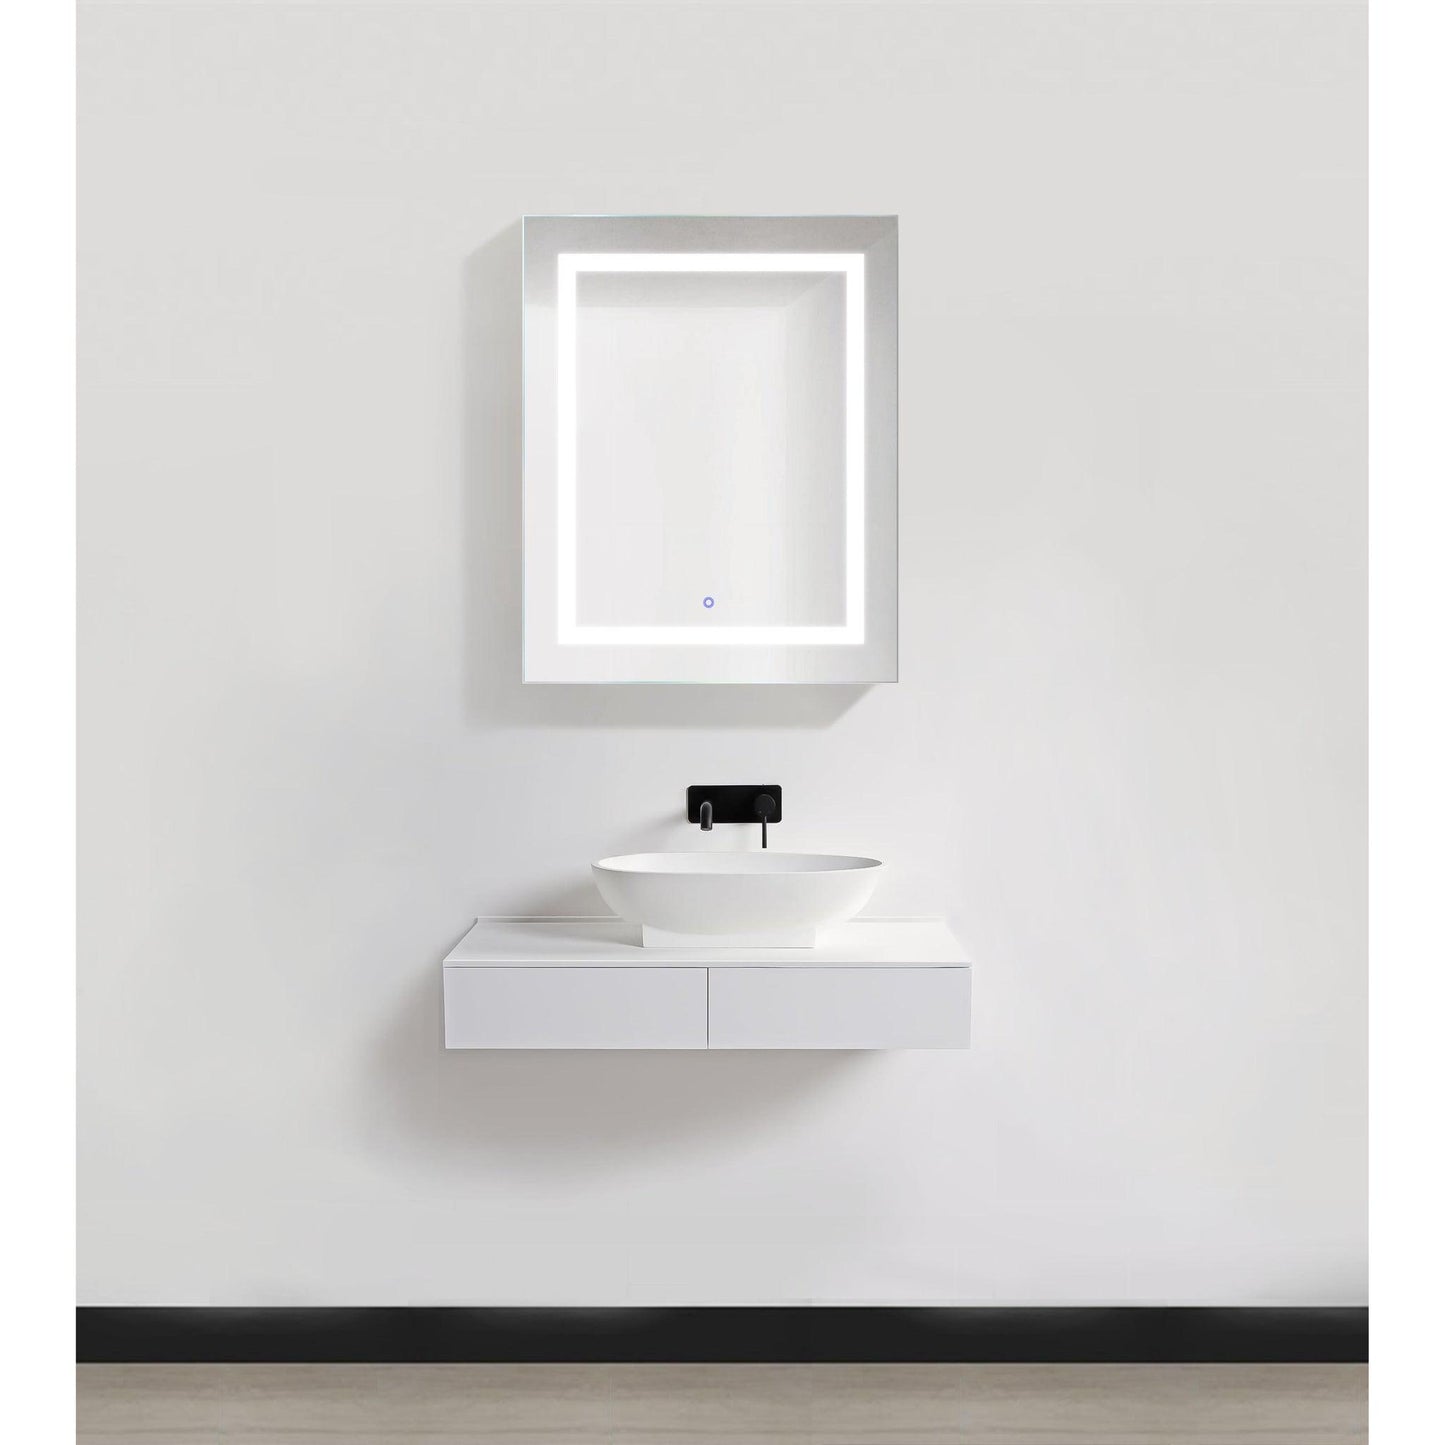 Krugg Reflections Svange 24" x 30" 5000K Single Left Opening Recessed/Surface-Mount Illuminated Silver Backed LED Medicine Cabinet Mirror With Built-in Defogger, Dimmer and Electrical Outlet